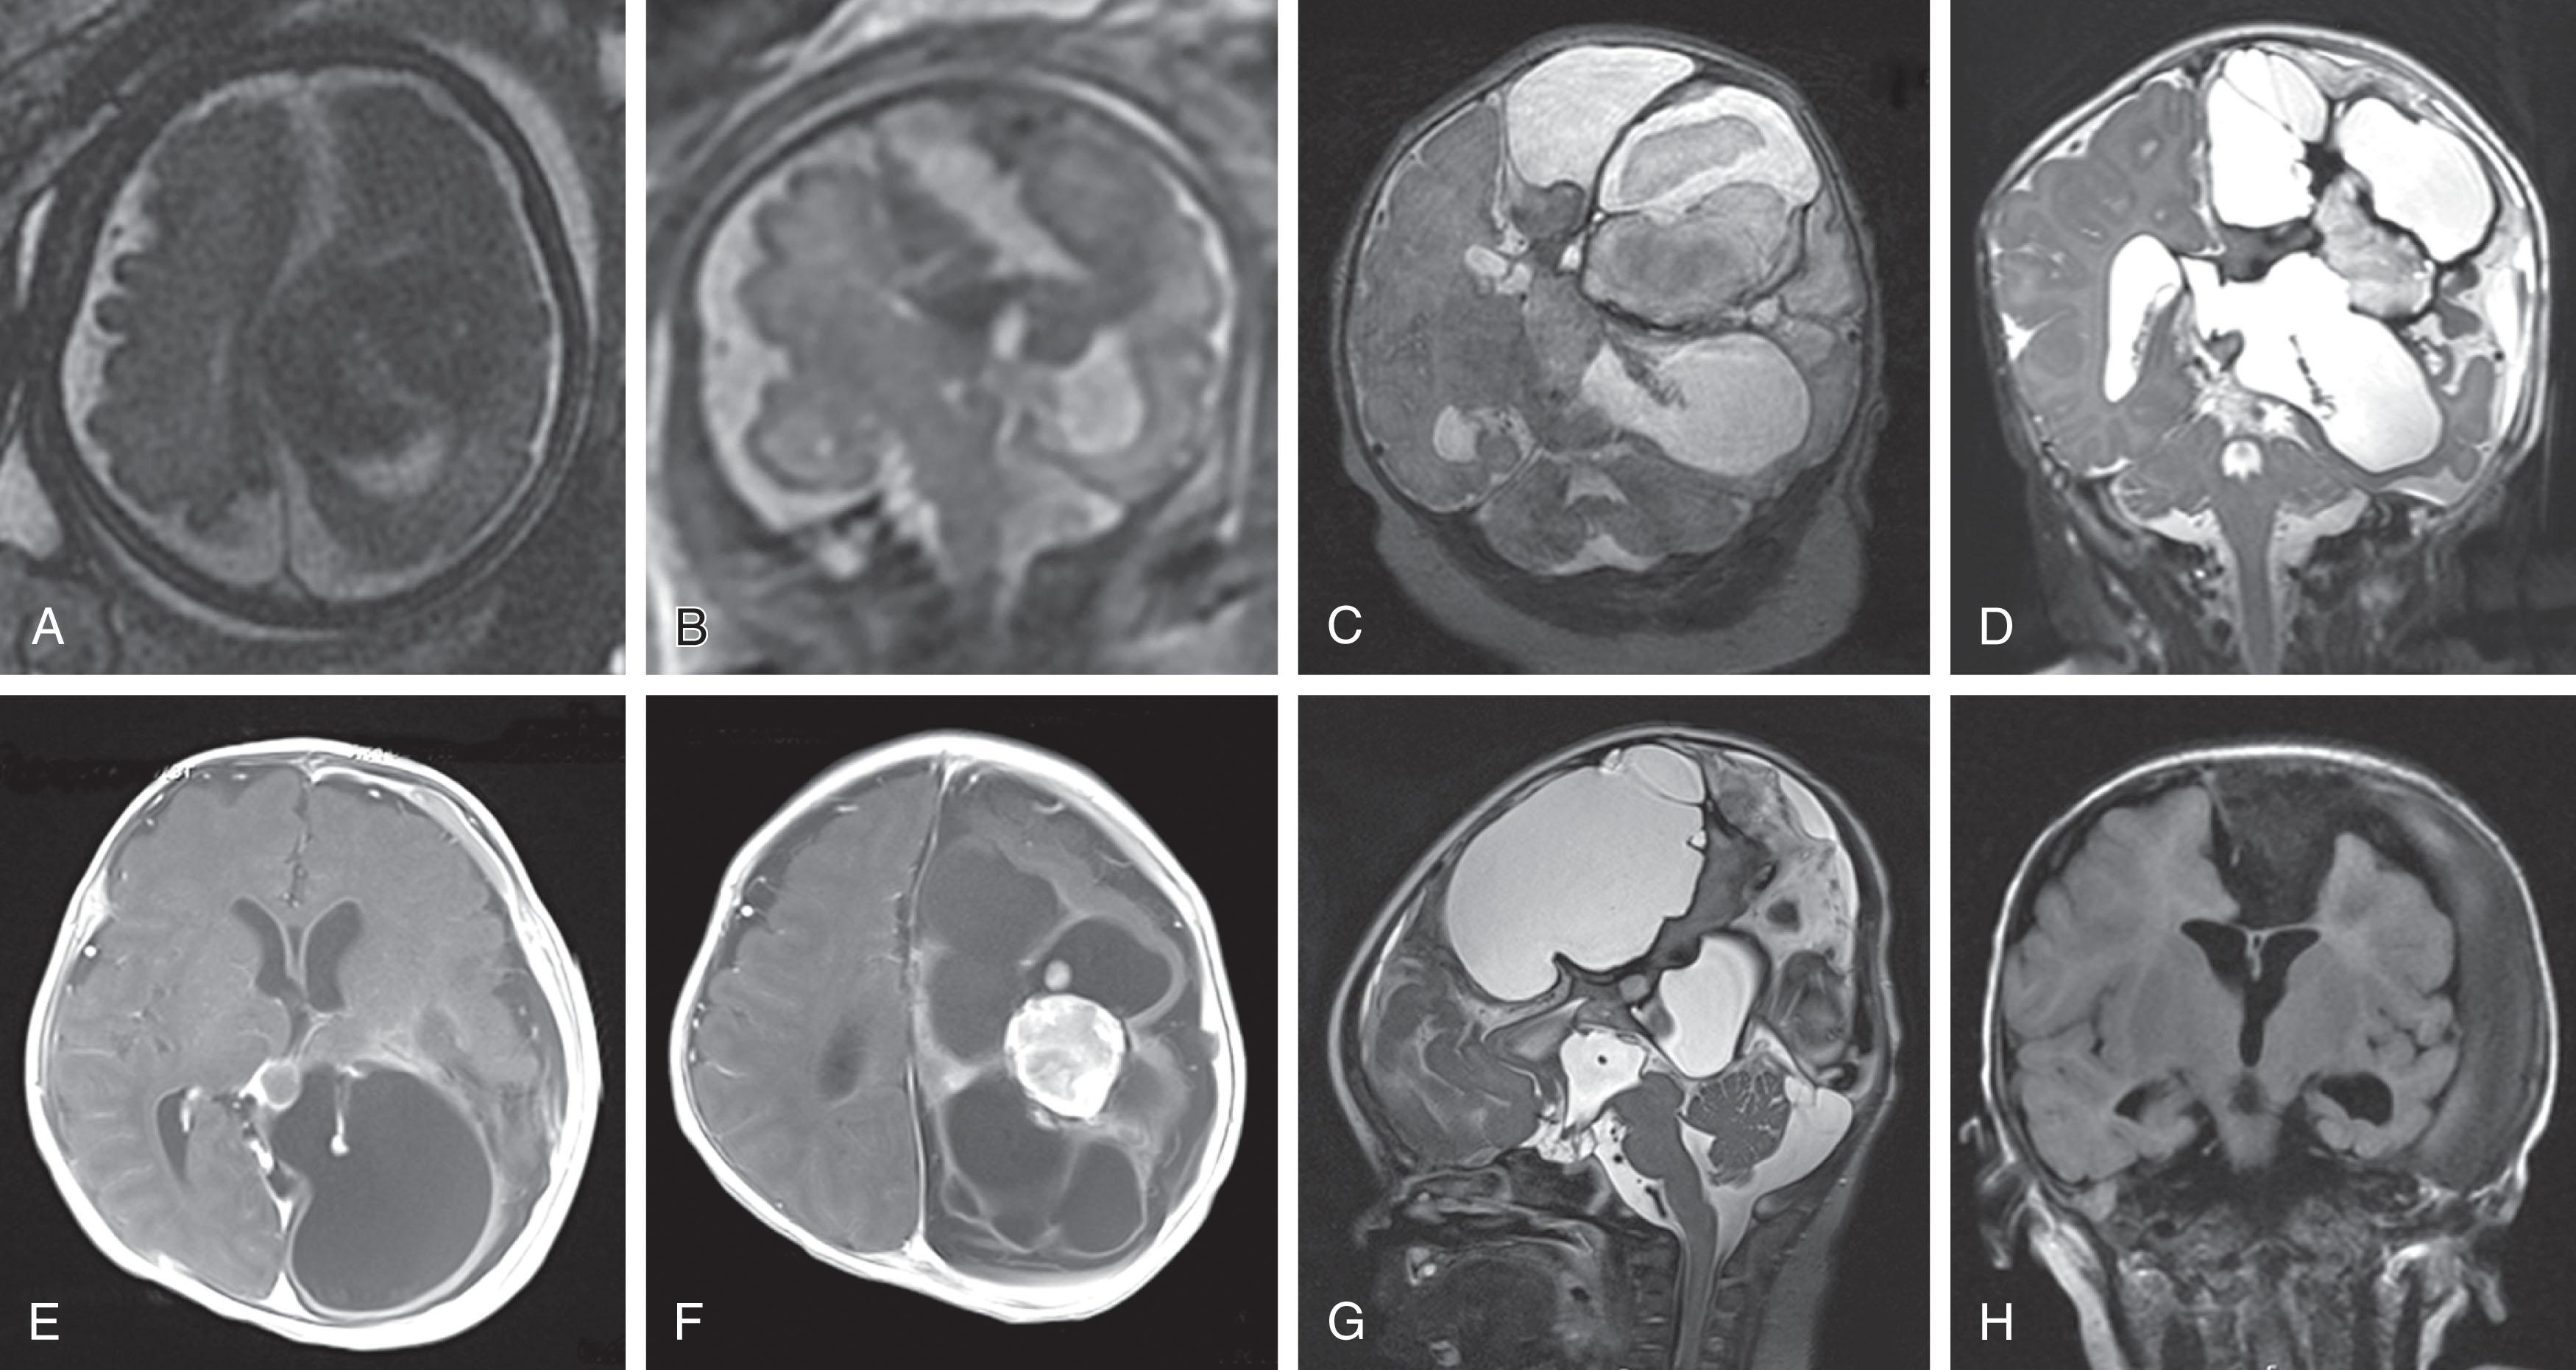 Fig. 41.3, Low-grade (World Health Organization grade I) glioneuronal tumor that was initially considered a high-grade glioma based on fetal and newborn magnetic resonance imaging (MRI) and consistent with desmoplastic infantile ganglioglioma (see text).